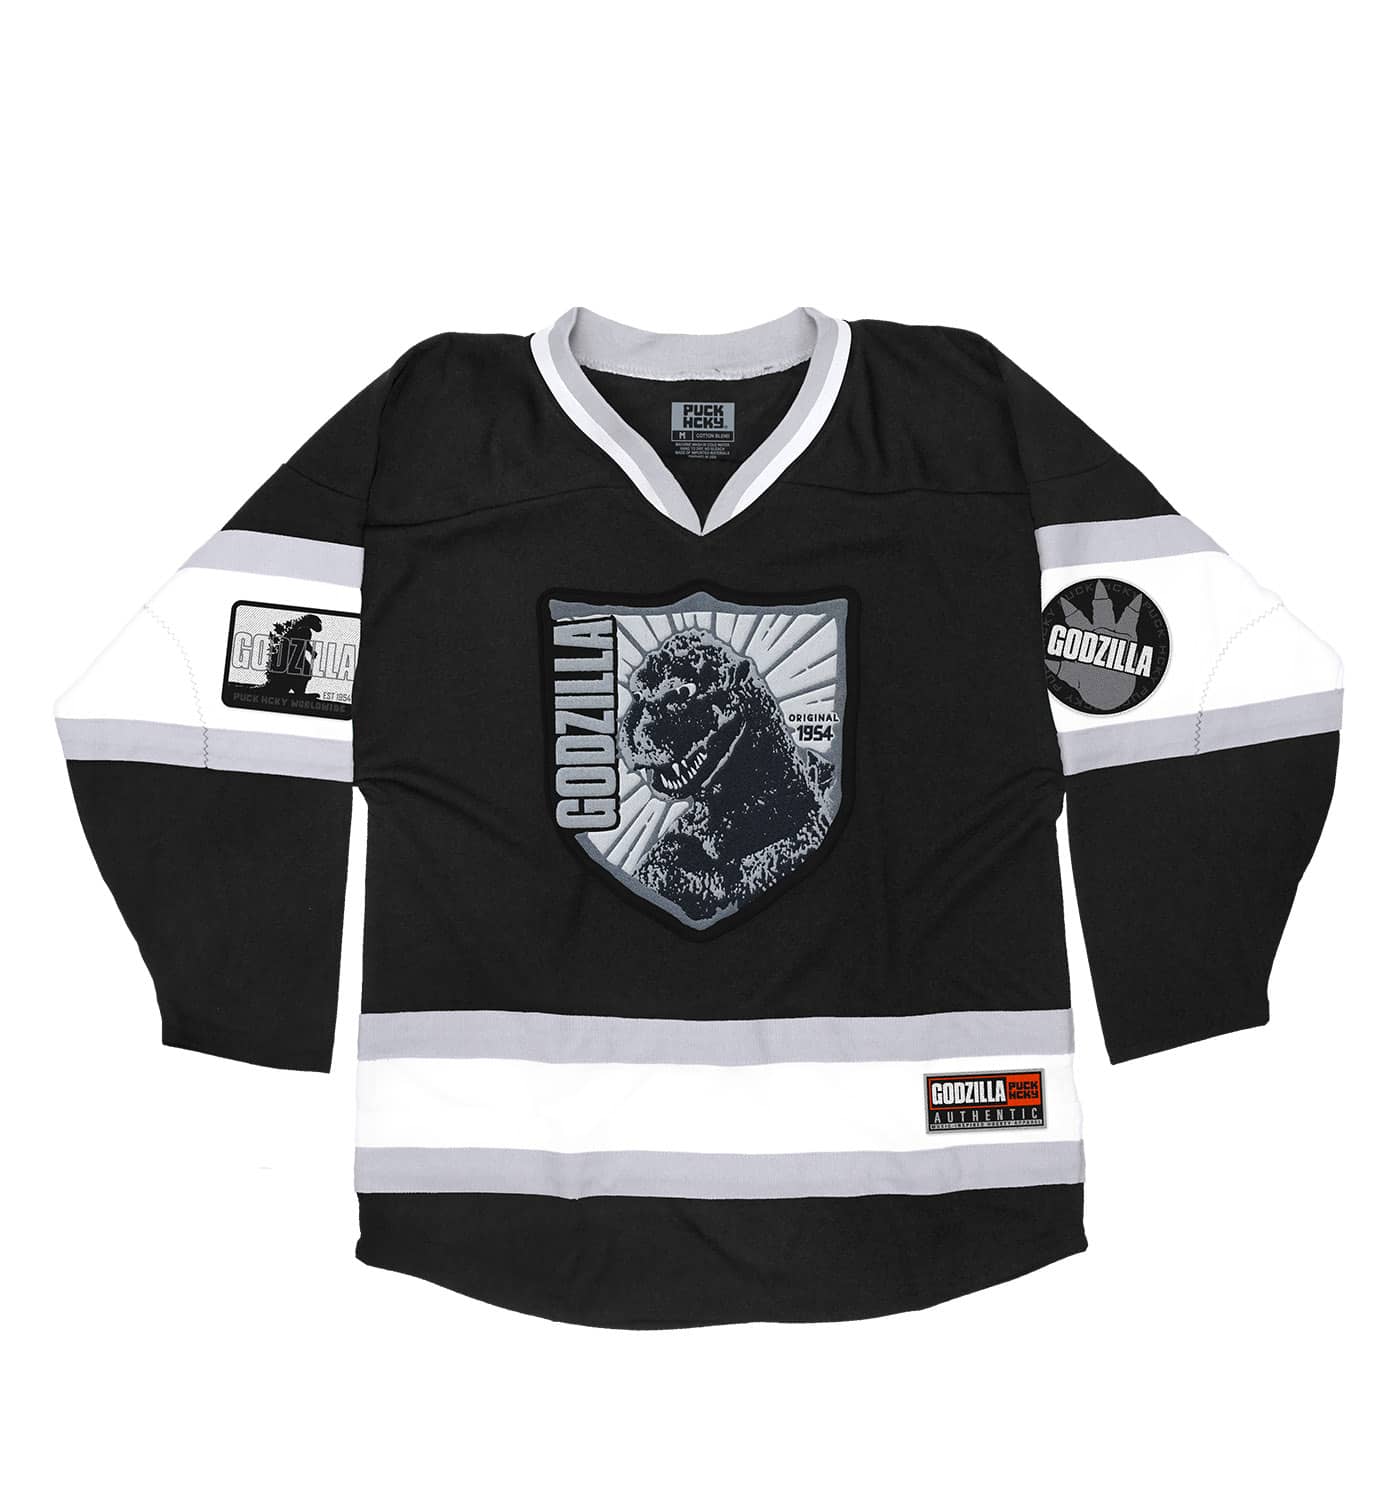 GODZILLA 'THE ORIGINAL G' deluxe youth hockey jersey in black, white, and grey front view